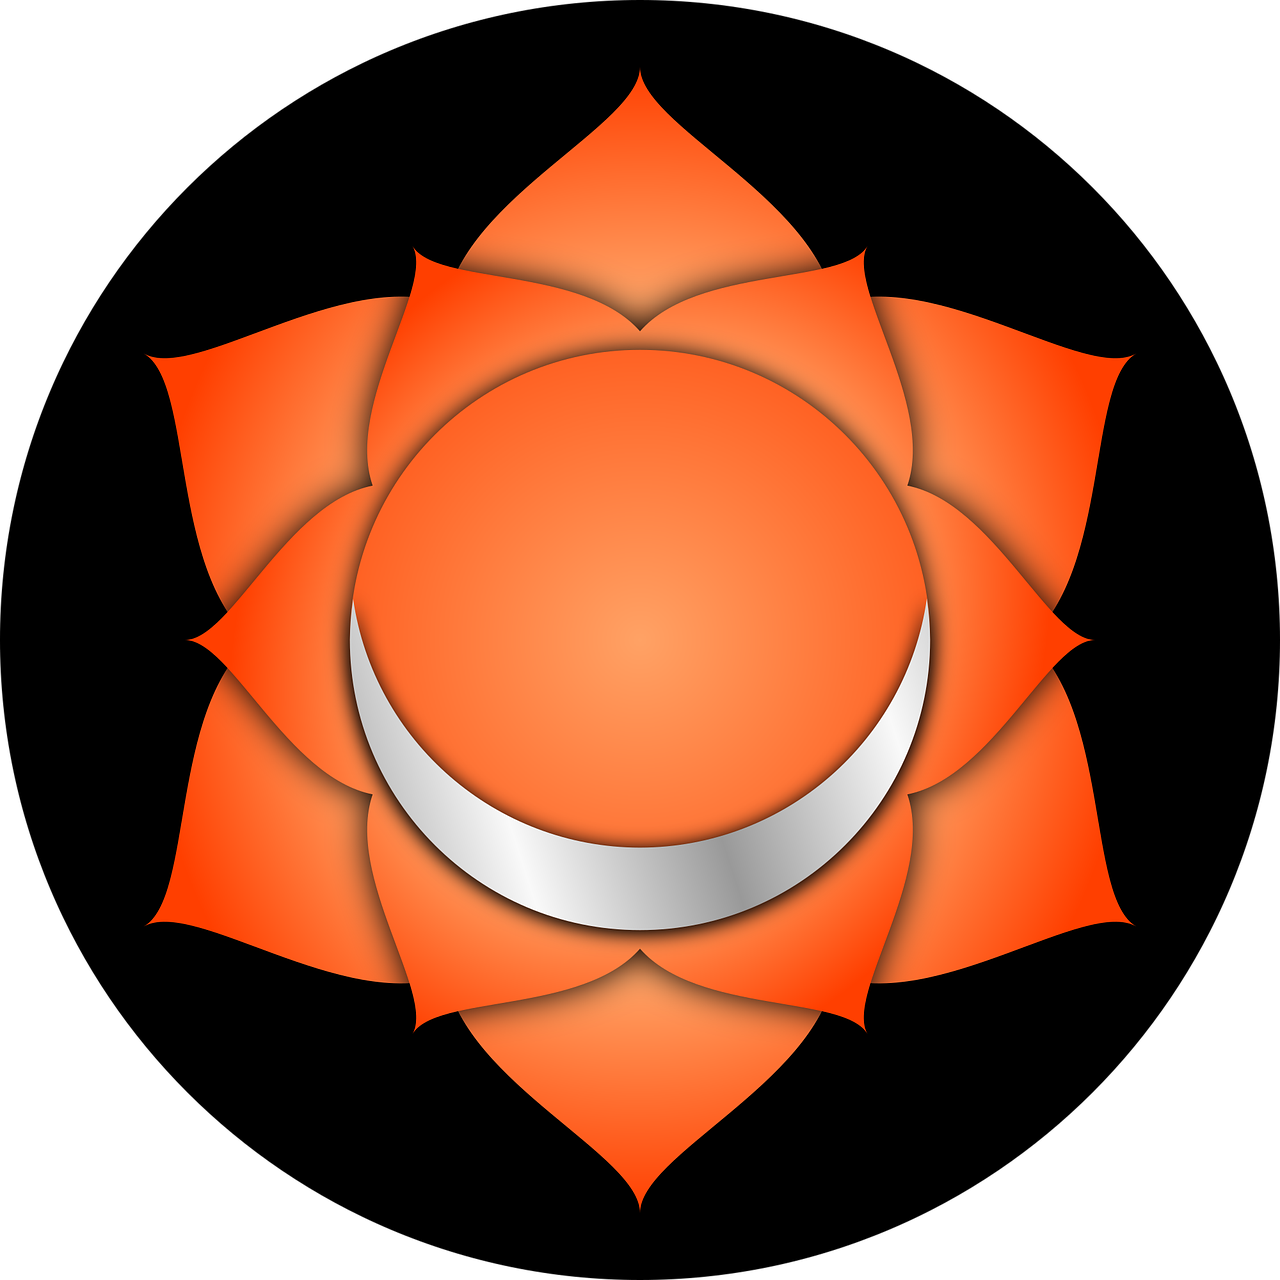 An illustration with six petals and a moon showing the design of the Svadhisthana symbol.